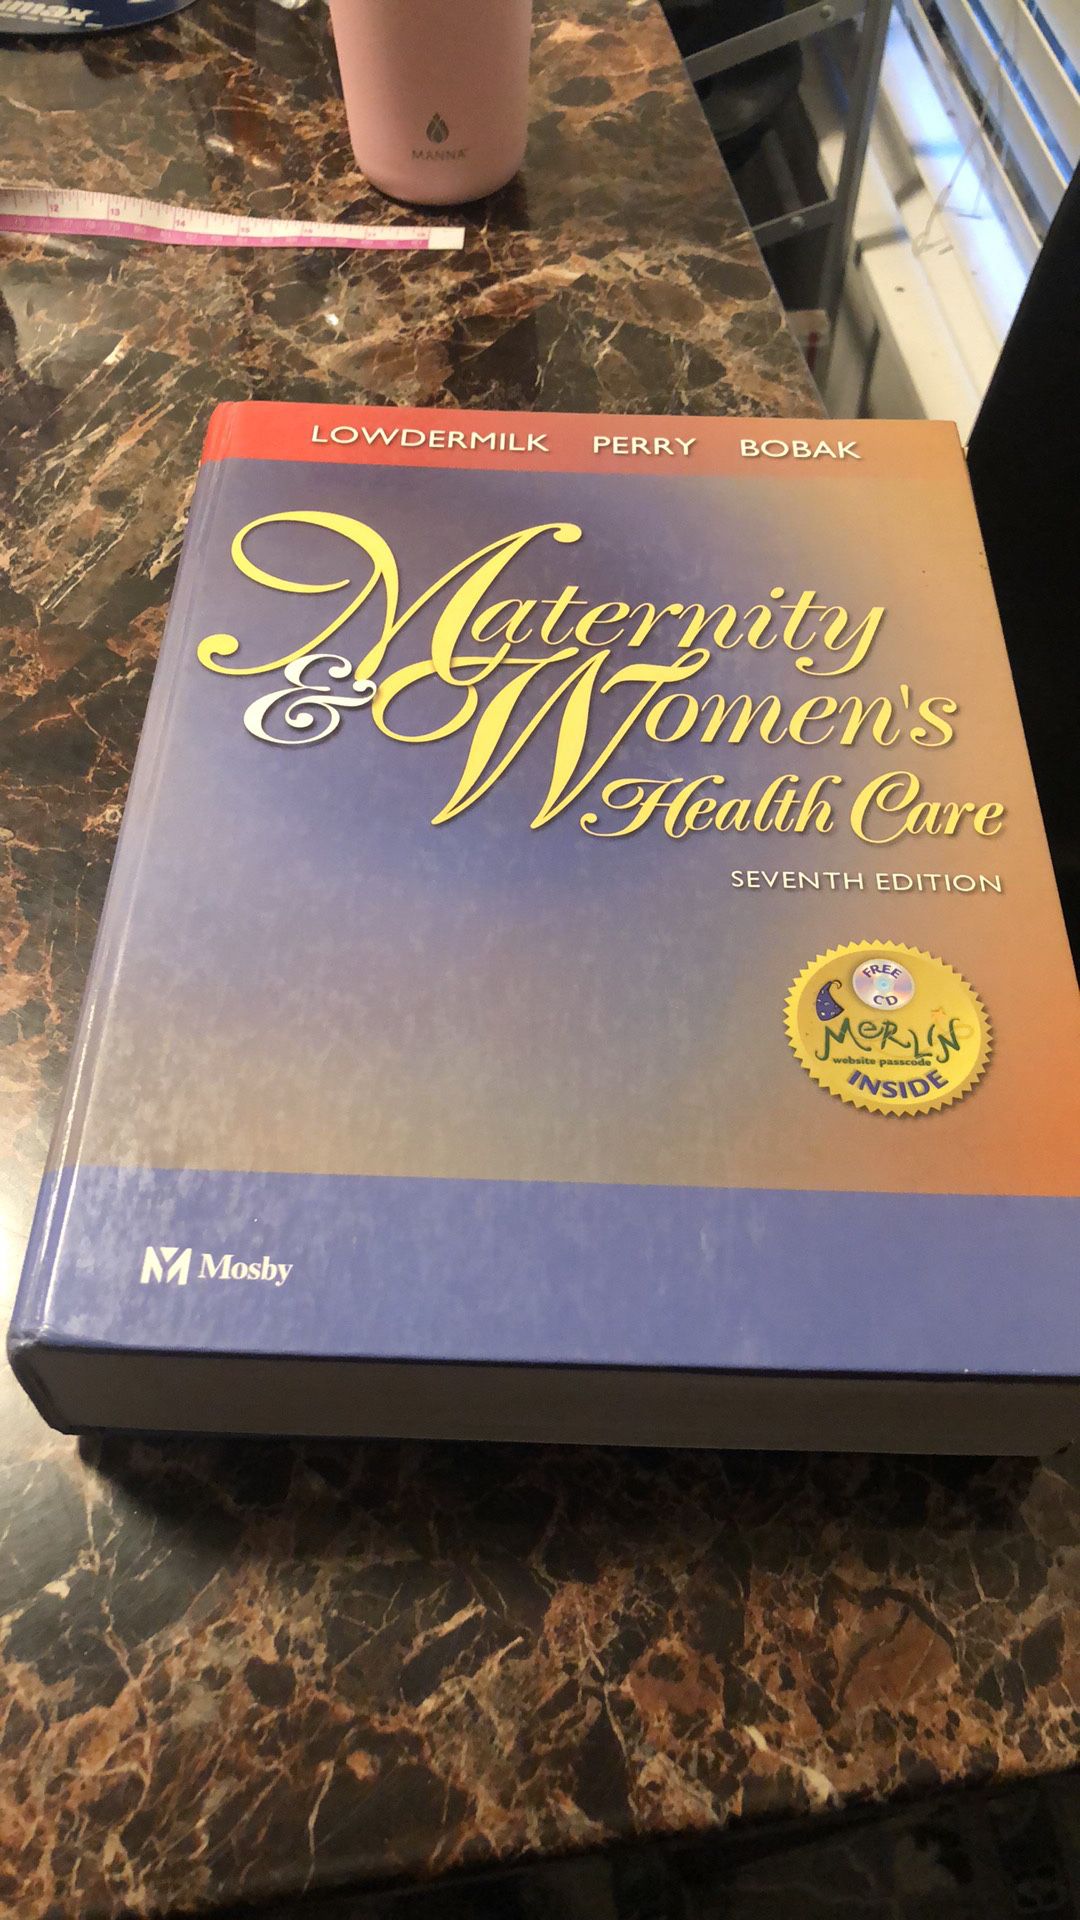 Maternity & Women's Health Care (with CD-Rom) 7th Edition